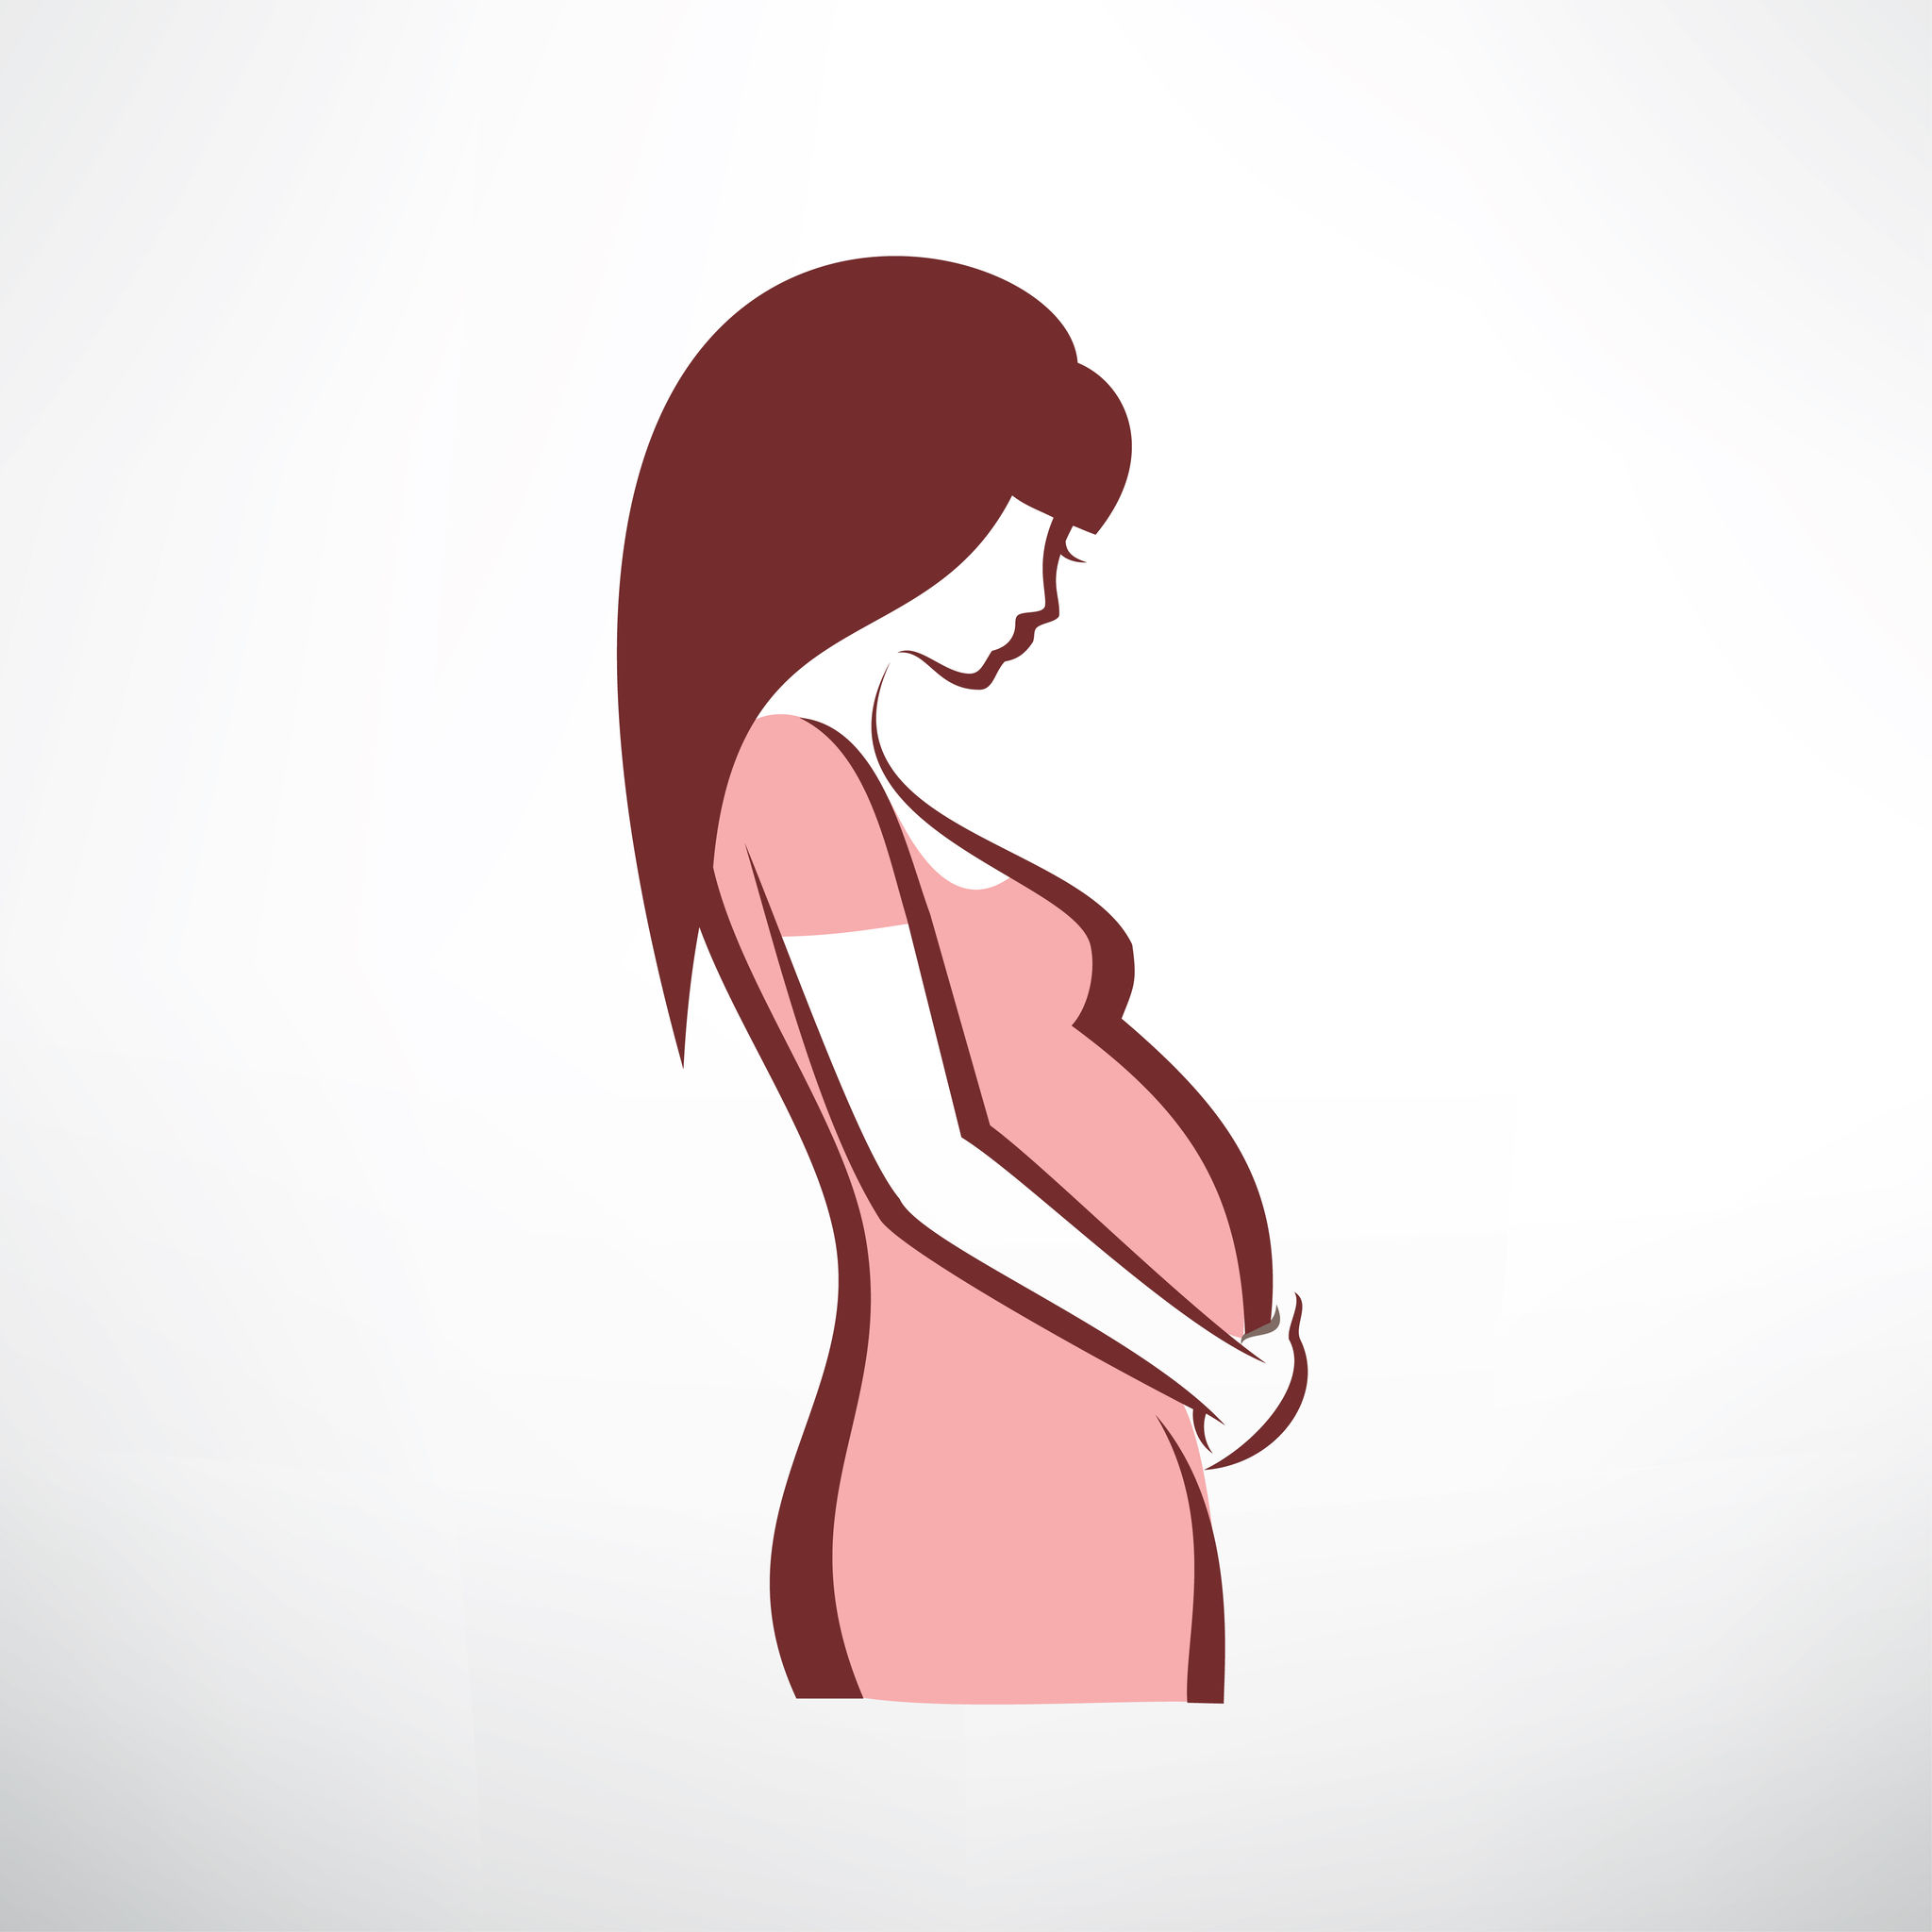 Image of a pregnant woman dressed in pink